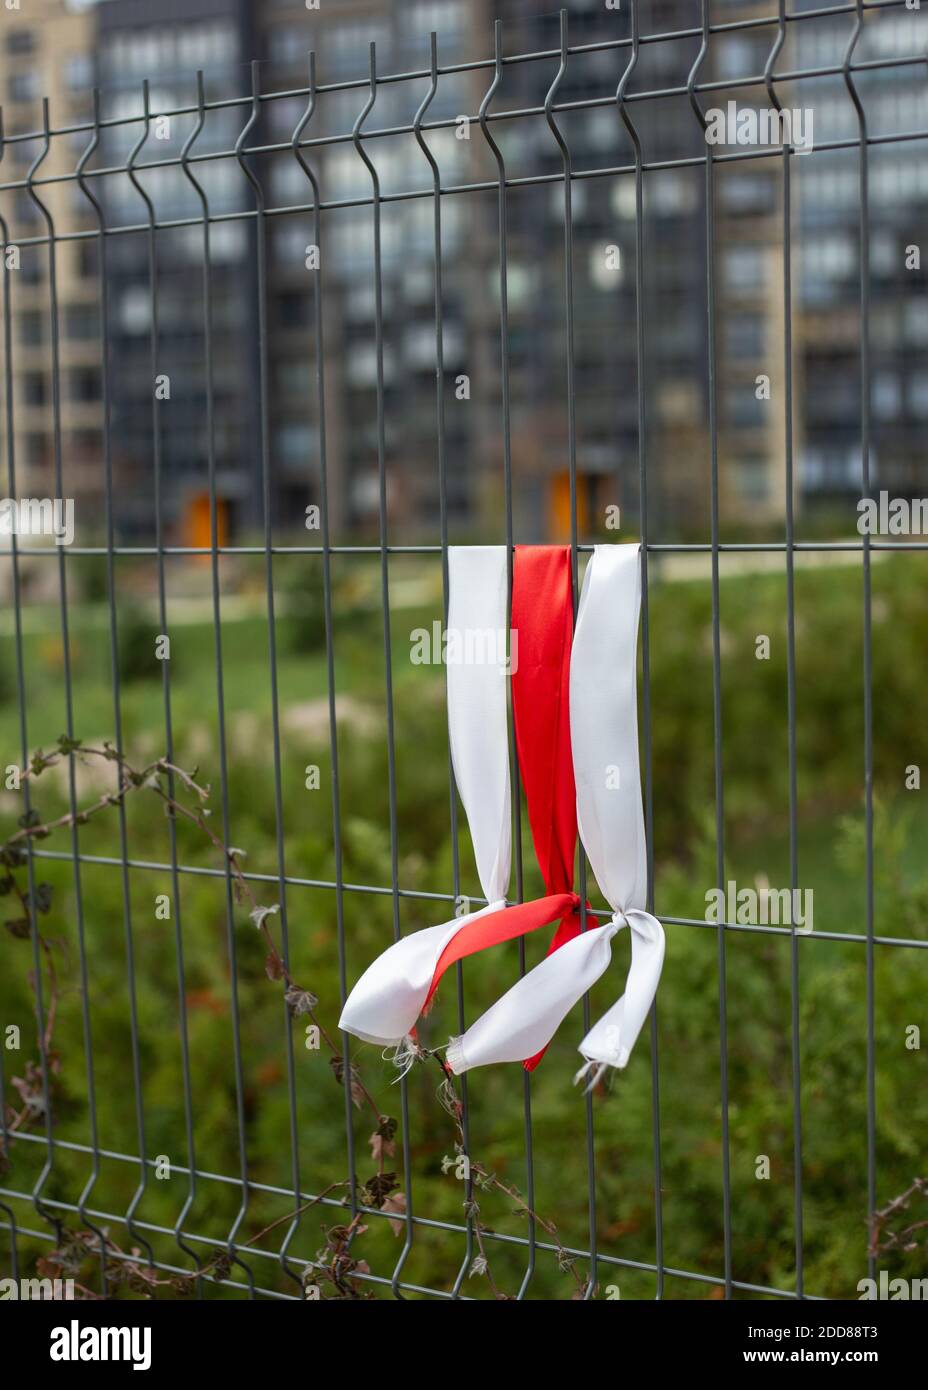 White-red-white ribbons on the fence. White-red-white flag. Stock Photo